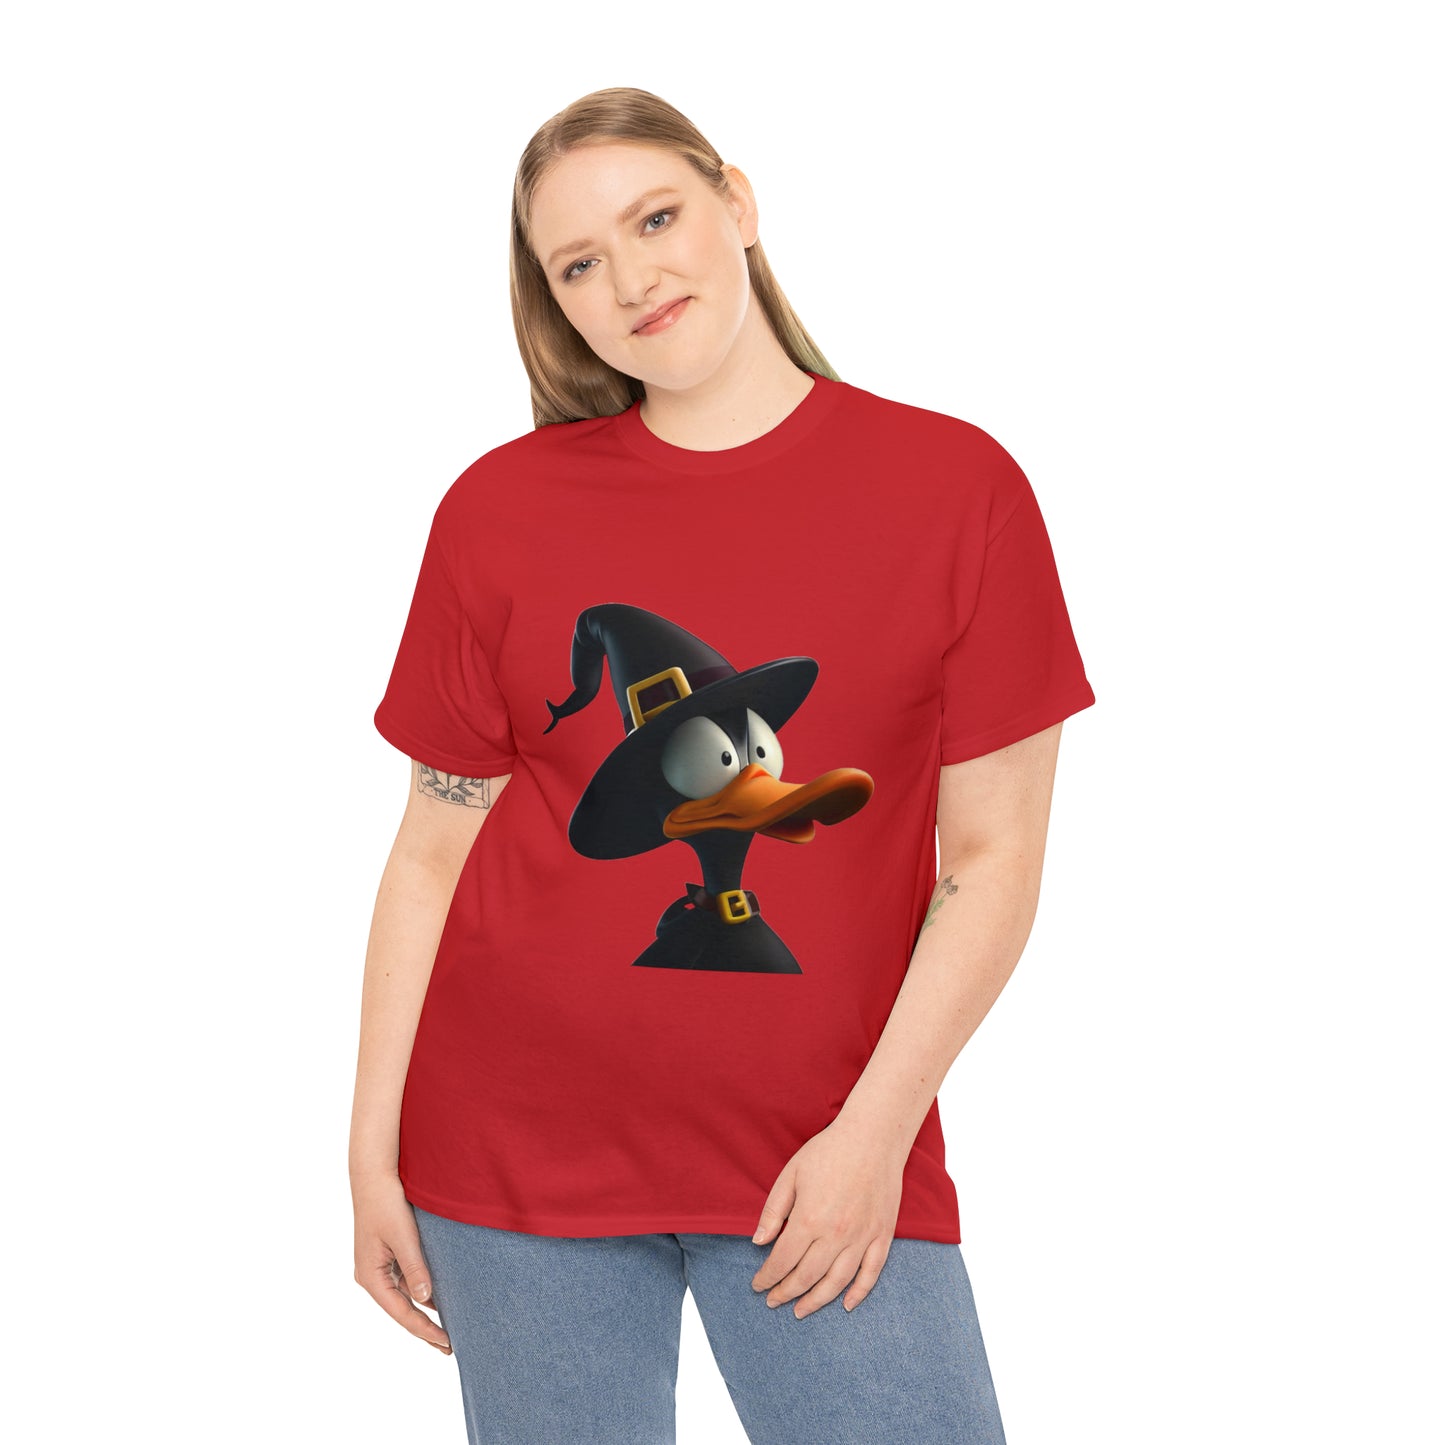 Witchy Daffy Duck Tee